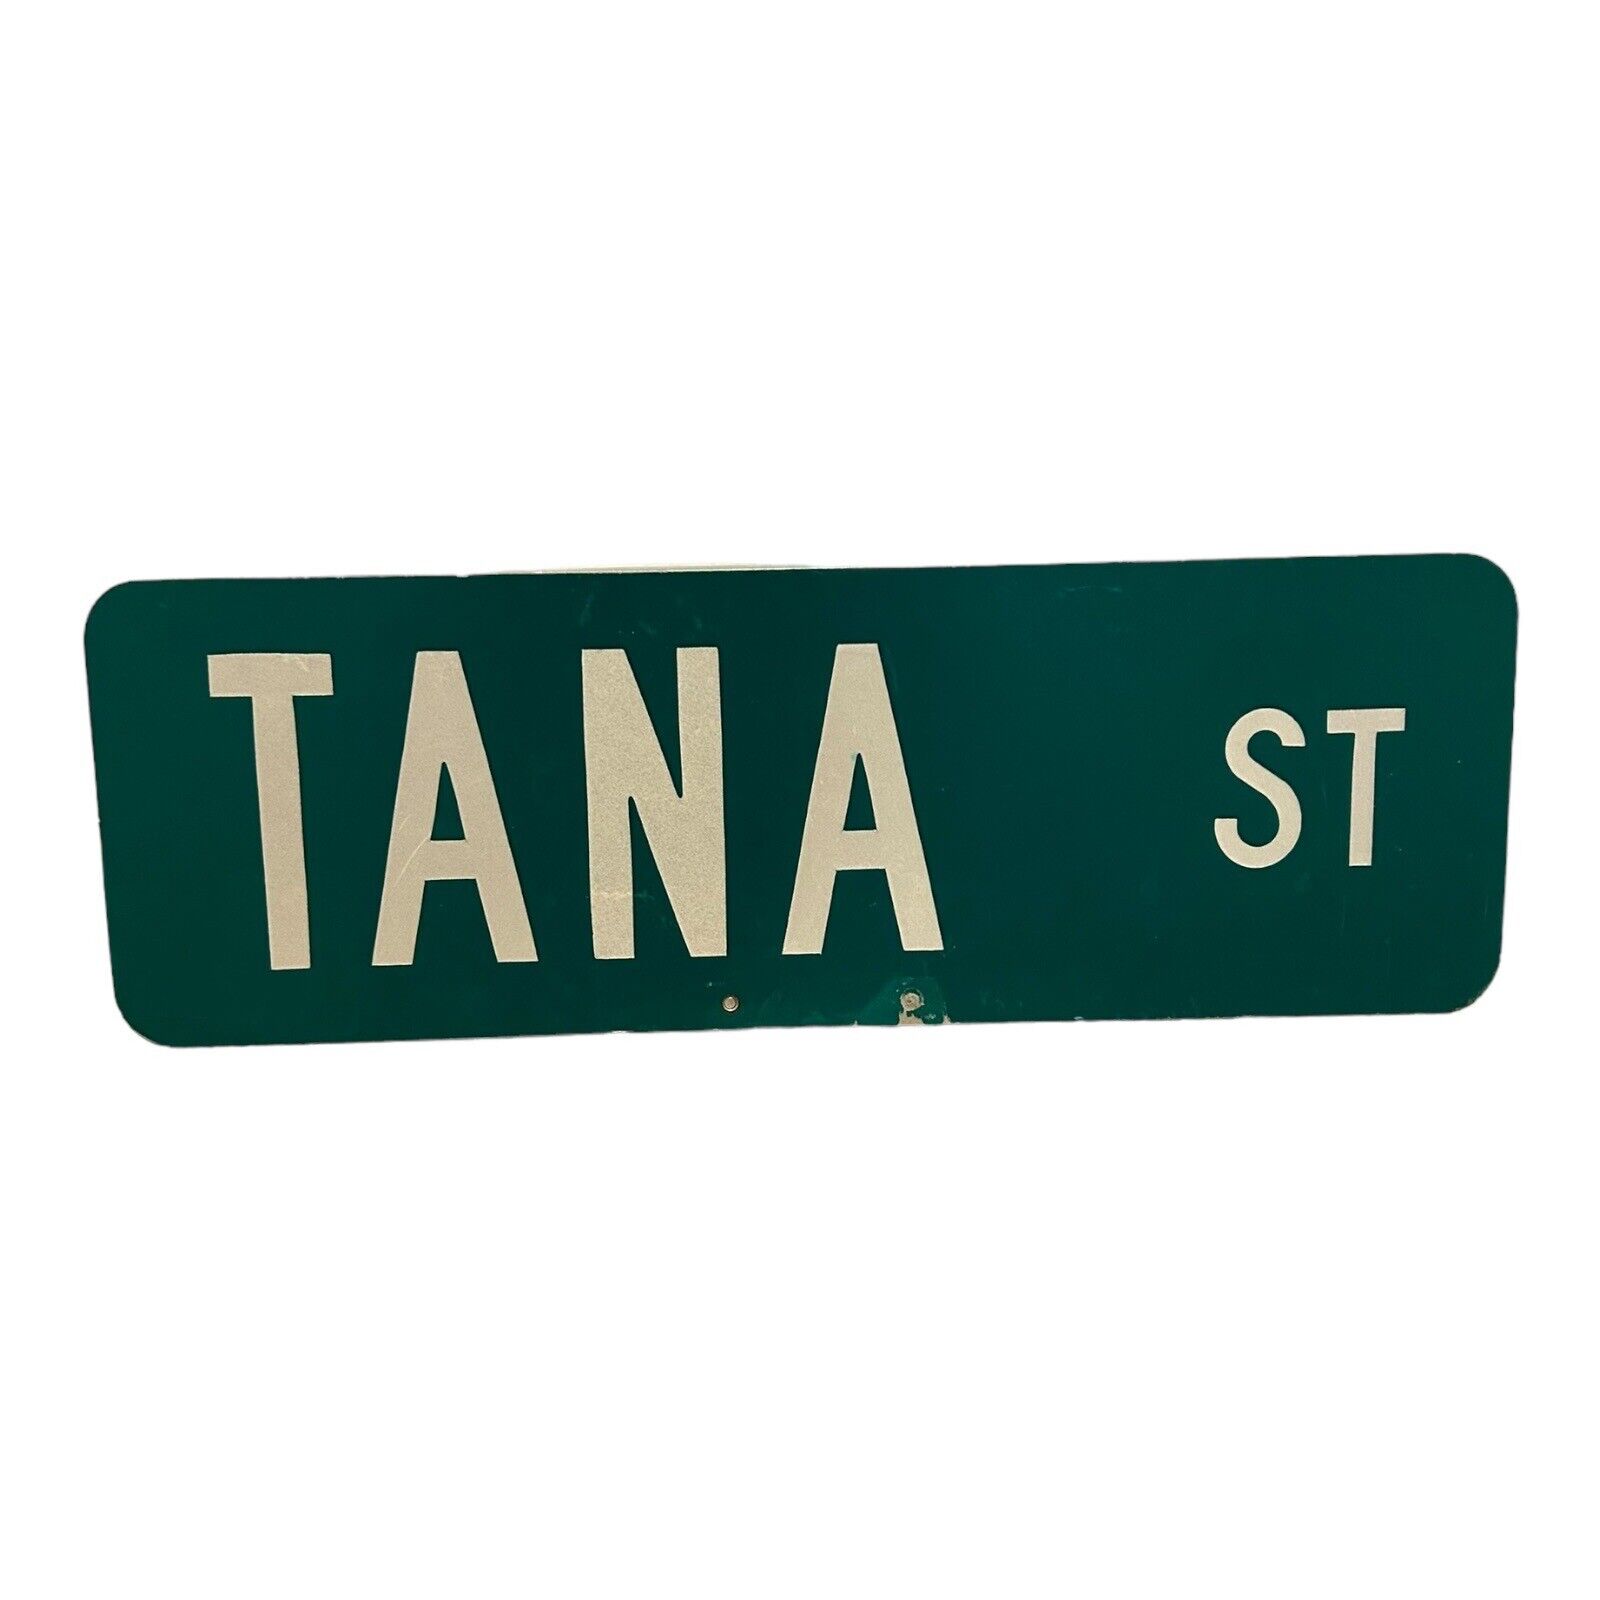 TANA Street Metal Sign, Official, Metal Street Sign, Double Sided, 18x6